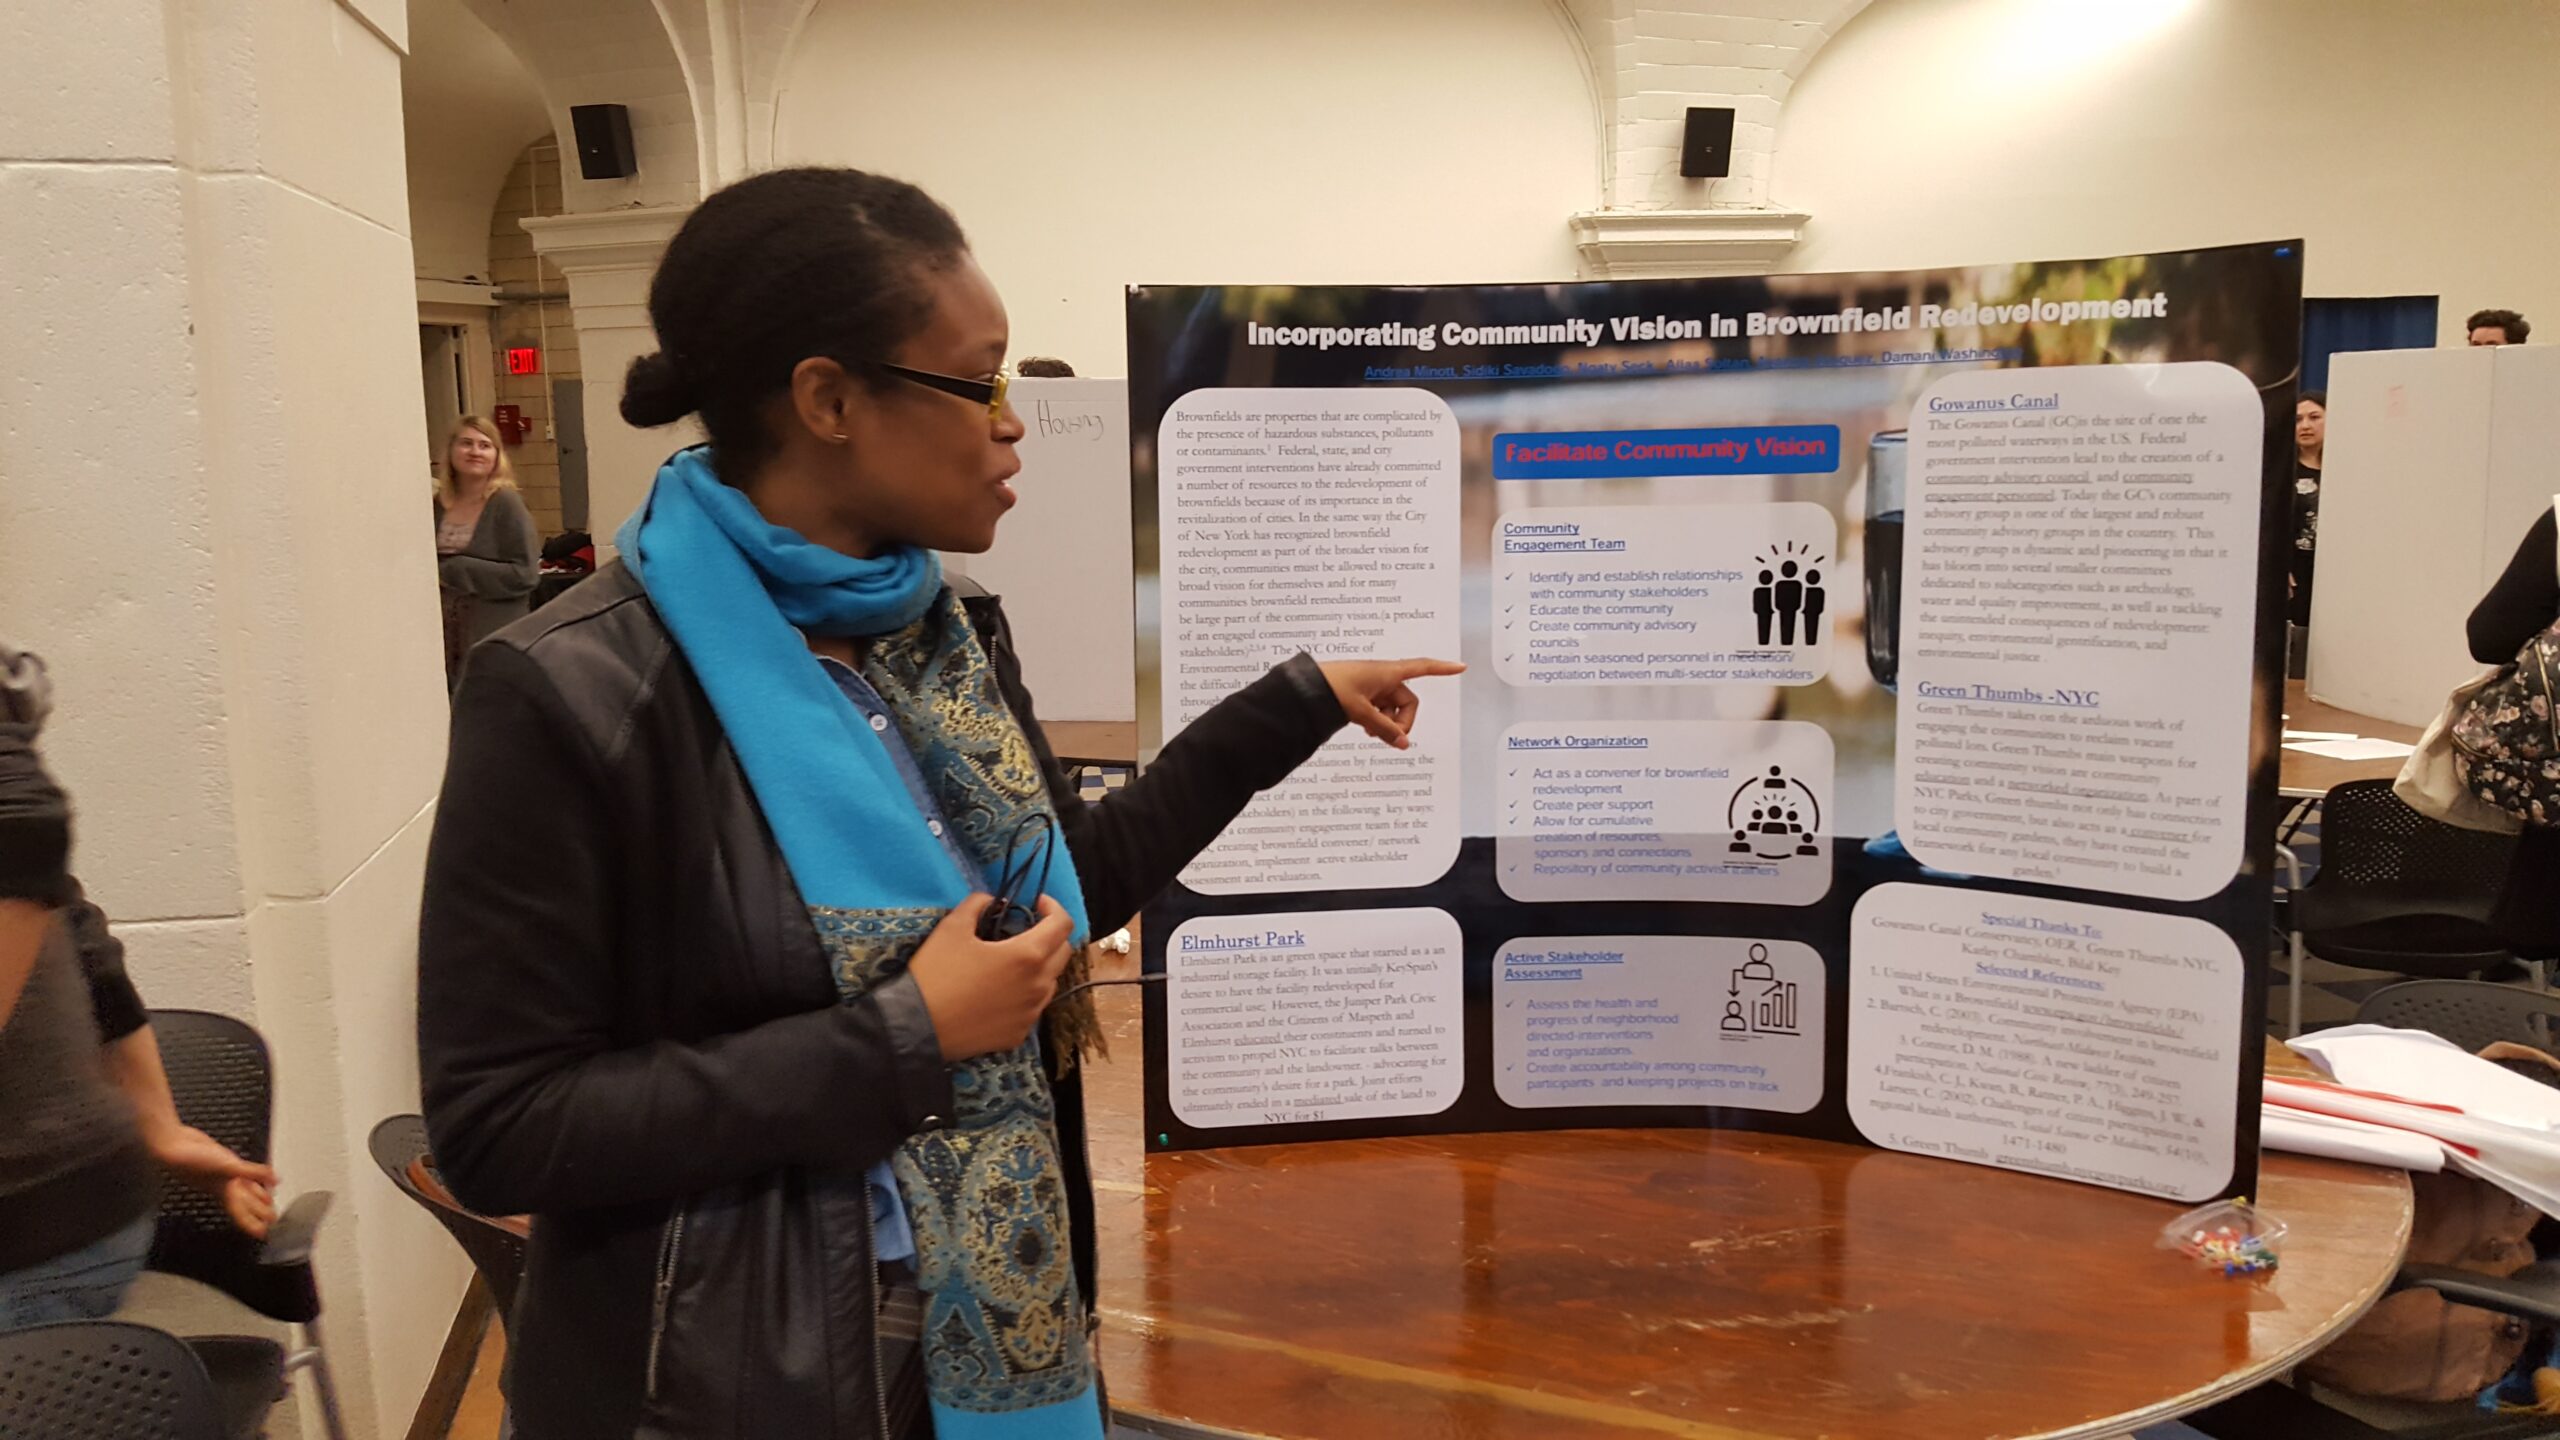 Ayanna Vasquez, fully funded MPH and preventative medicine residency at the University of Wisconsin-Madison, wearing a black jacket and bright blue scarf around her neck, stands by her poster board. With her hand stretched out and pointing, she presents a specific section of her her research into NYC brownfields.